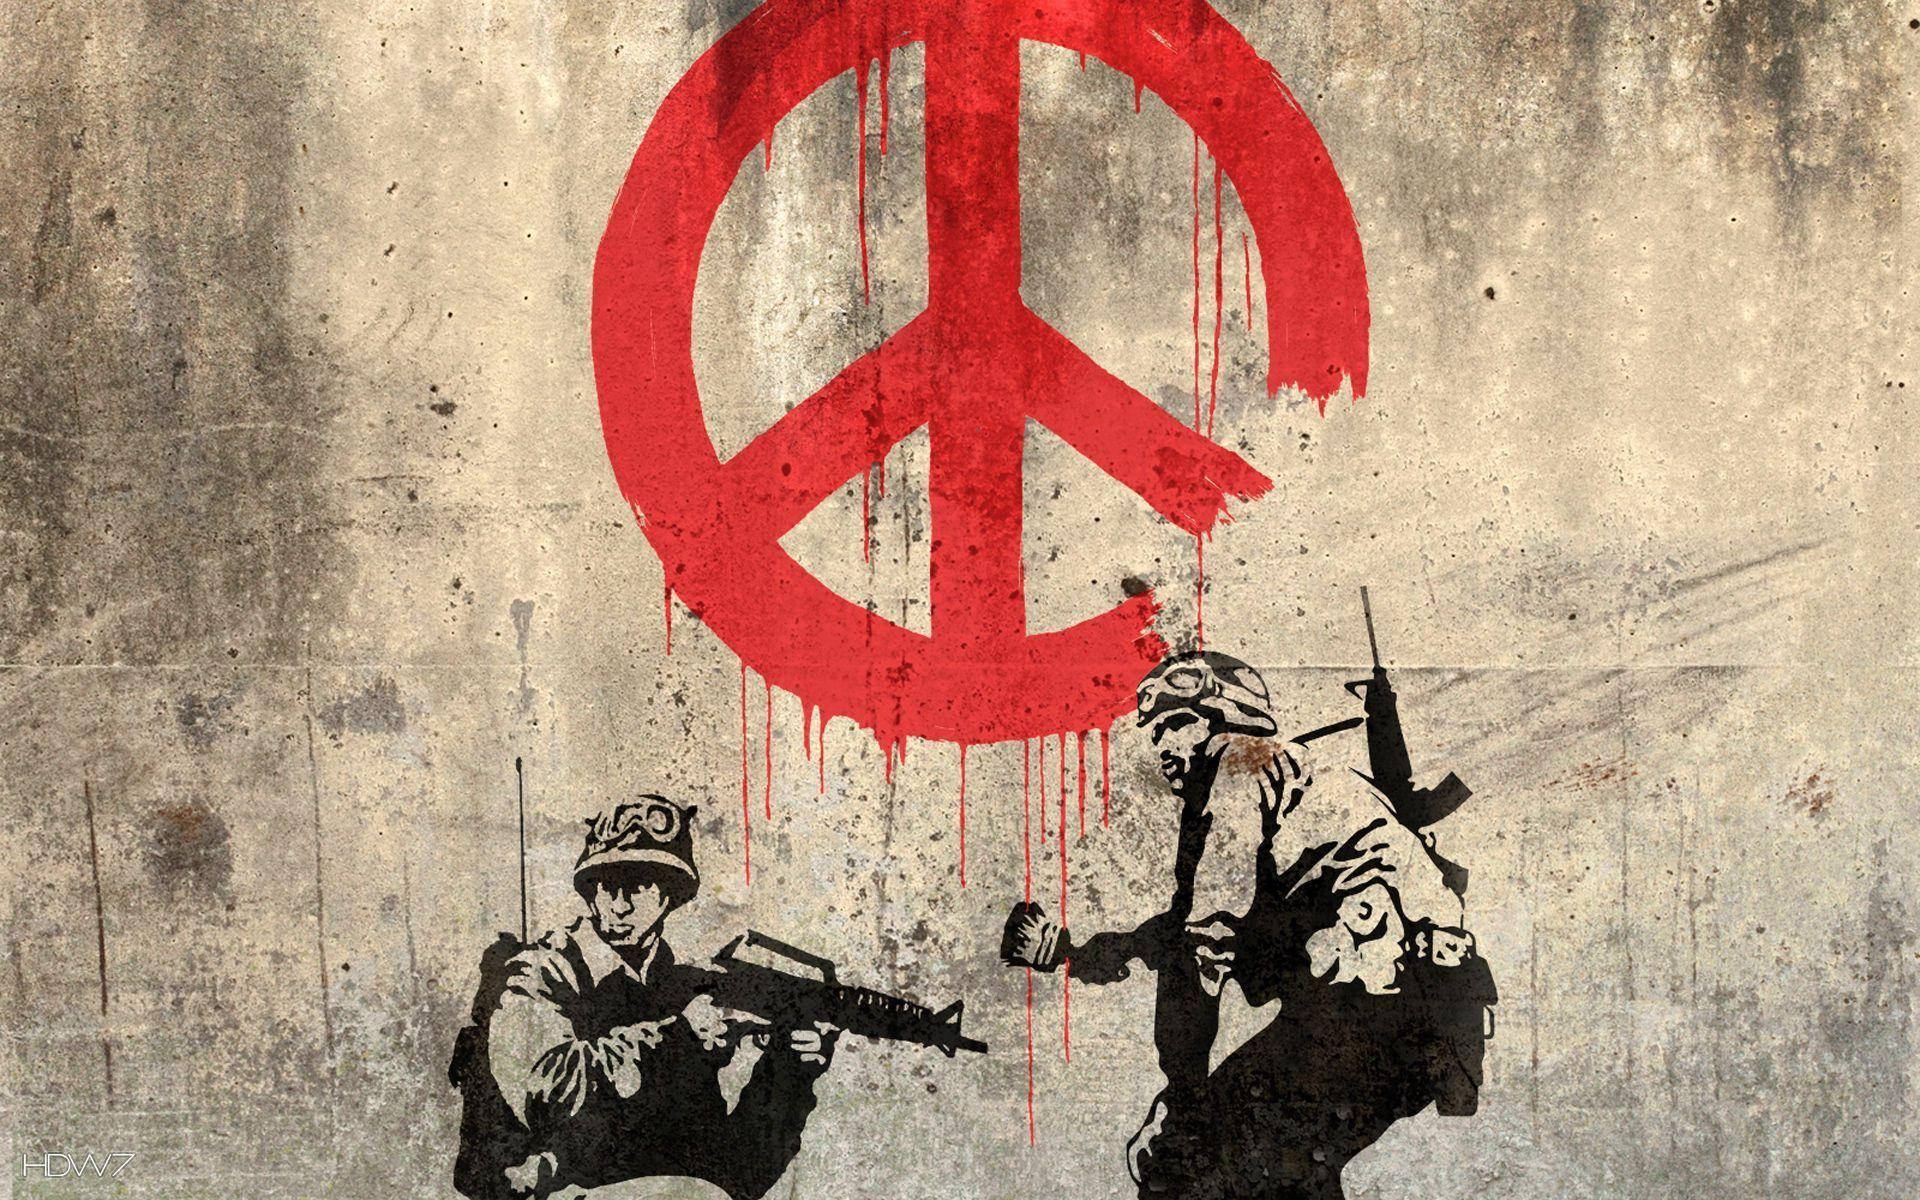 1920X1200 Peace Wallpaper and Background